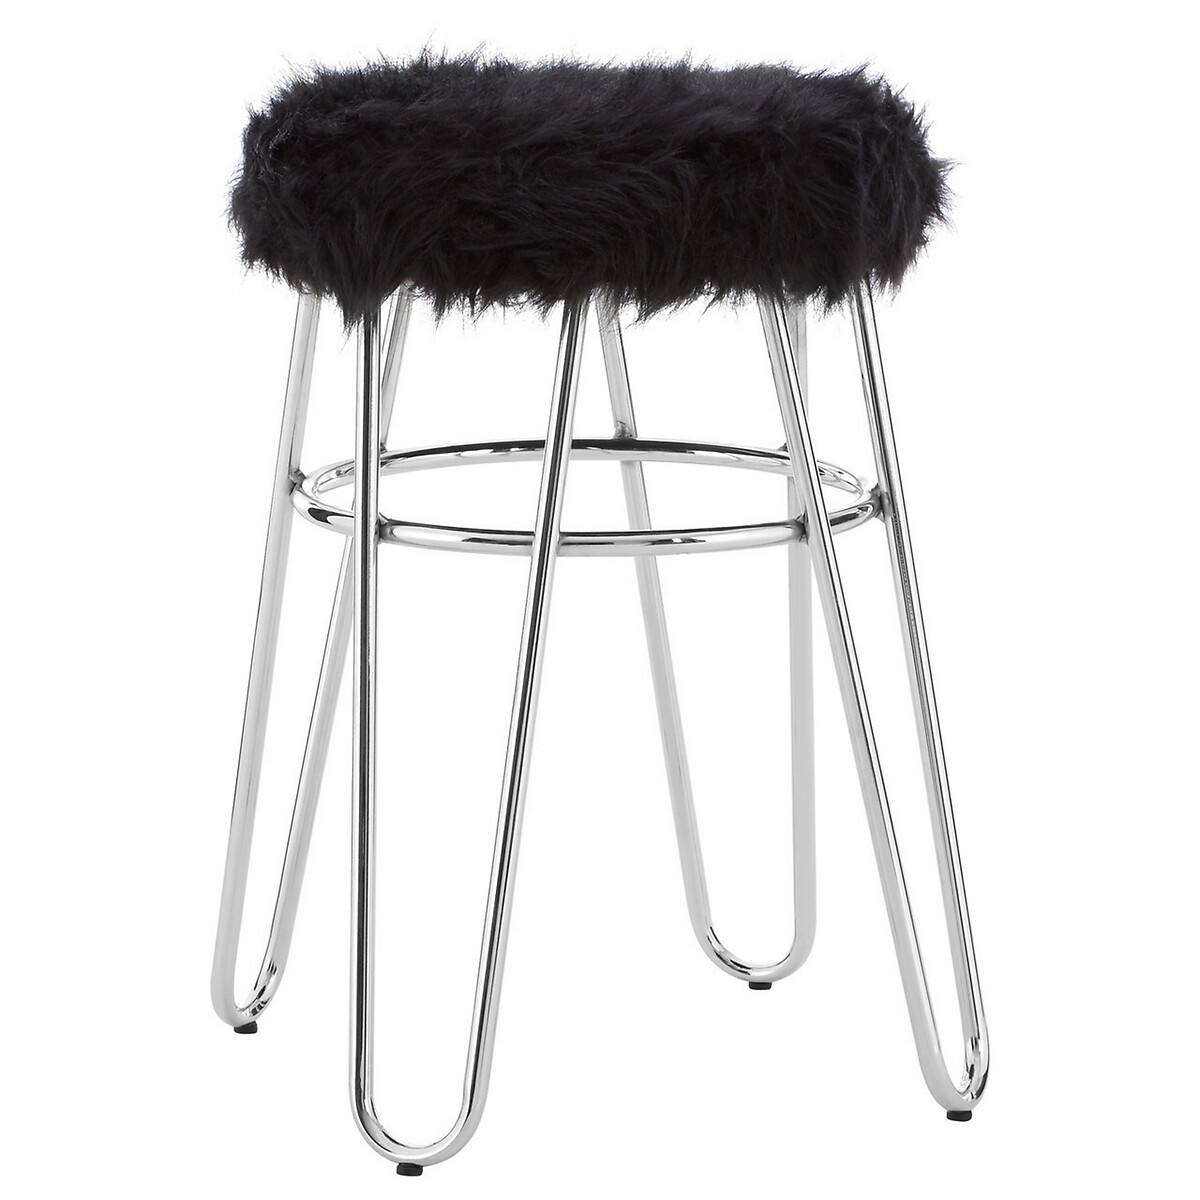 Stool With Faux Fur Black Chrome, Faux Fur Counter Stools